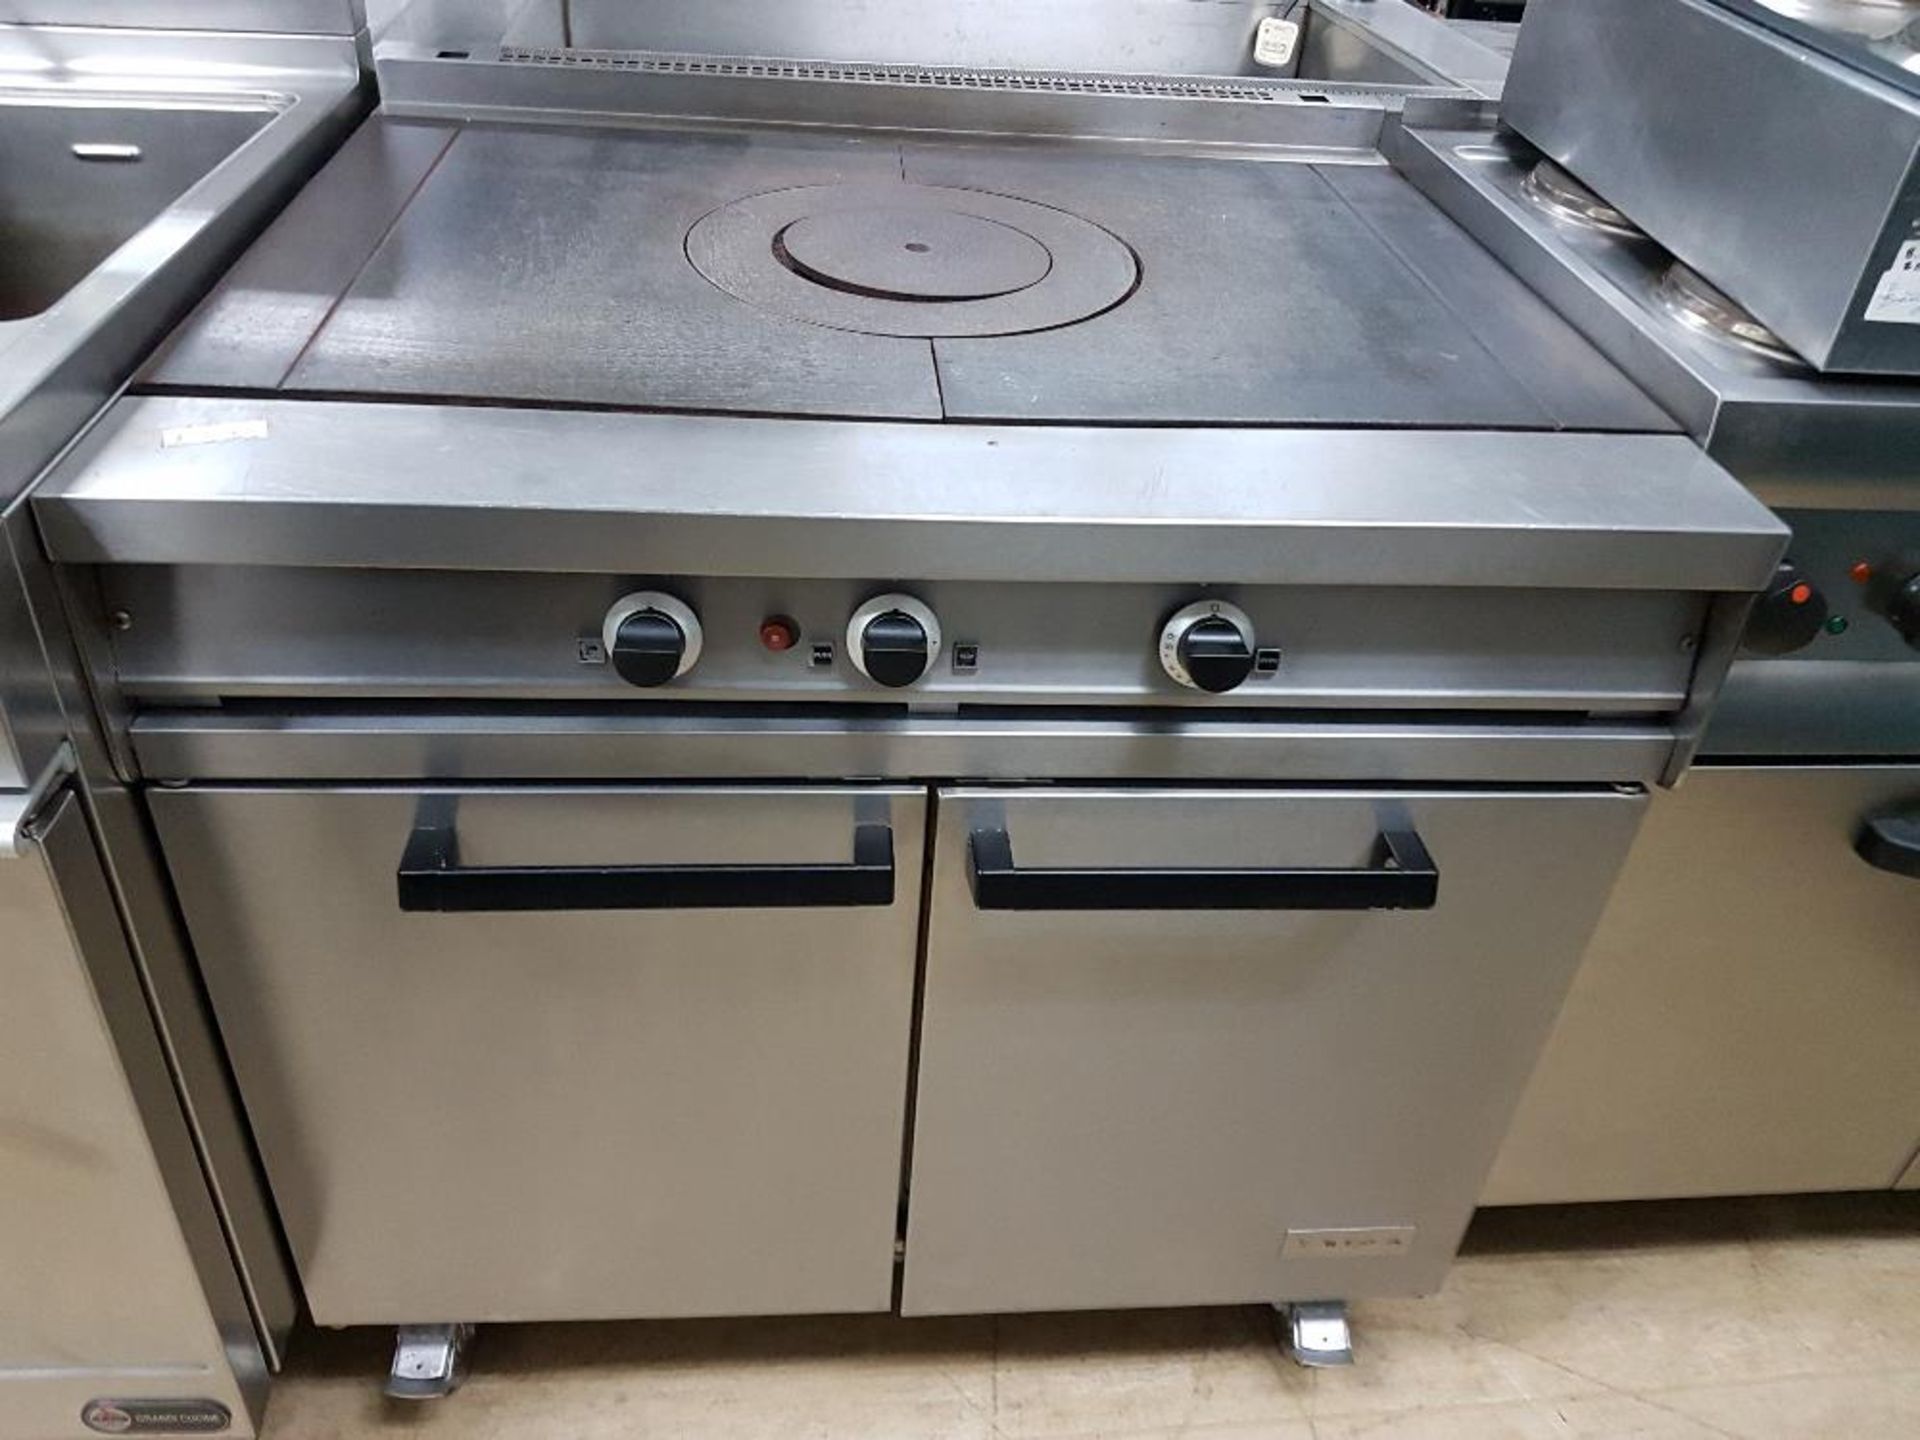 Falcon Solid Top Cooker with Large Oven Nat Gas – Fully Serviced -V/ Clean   W900mm x H880mm x